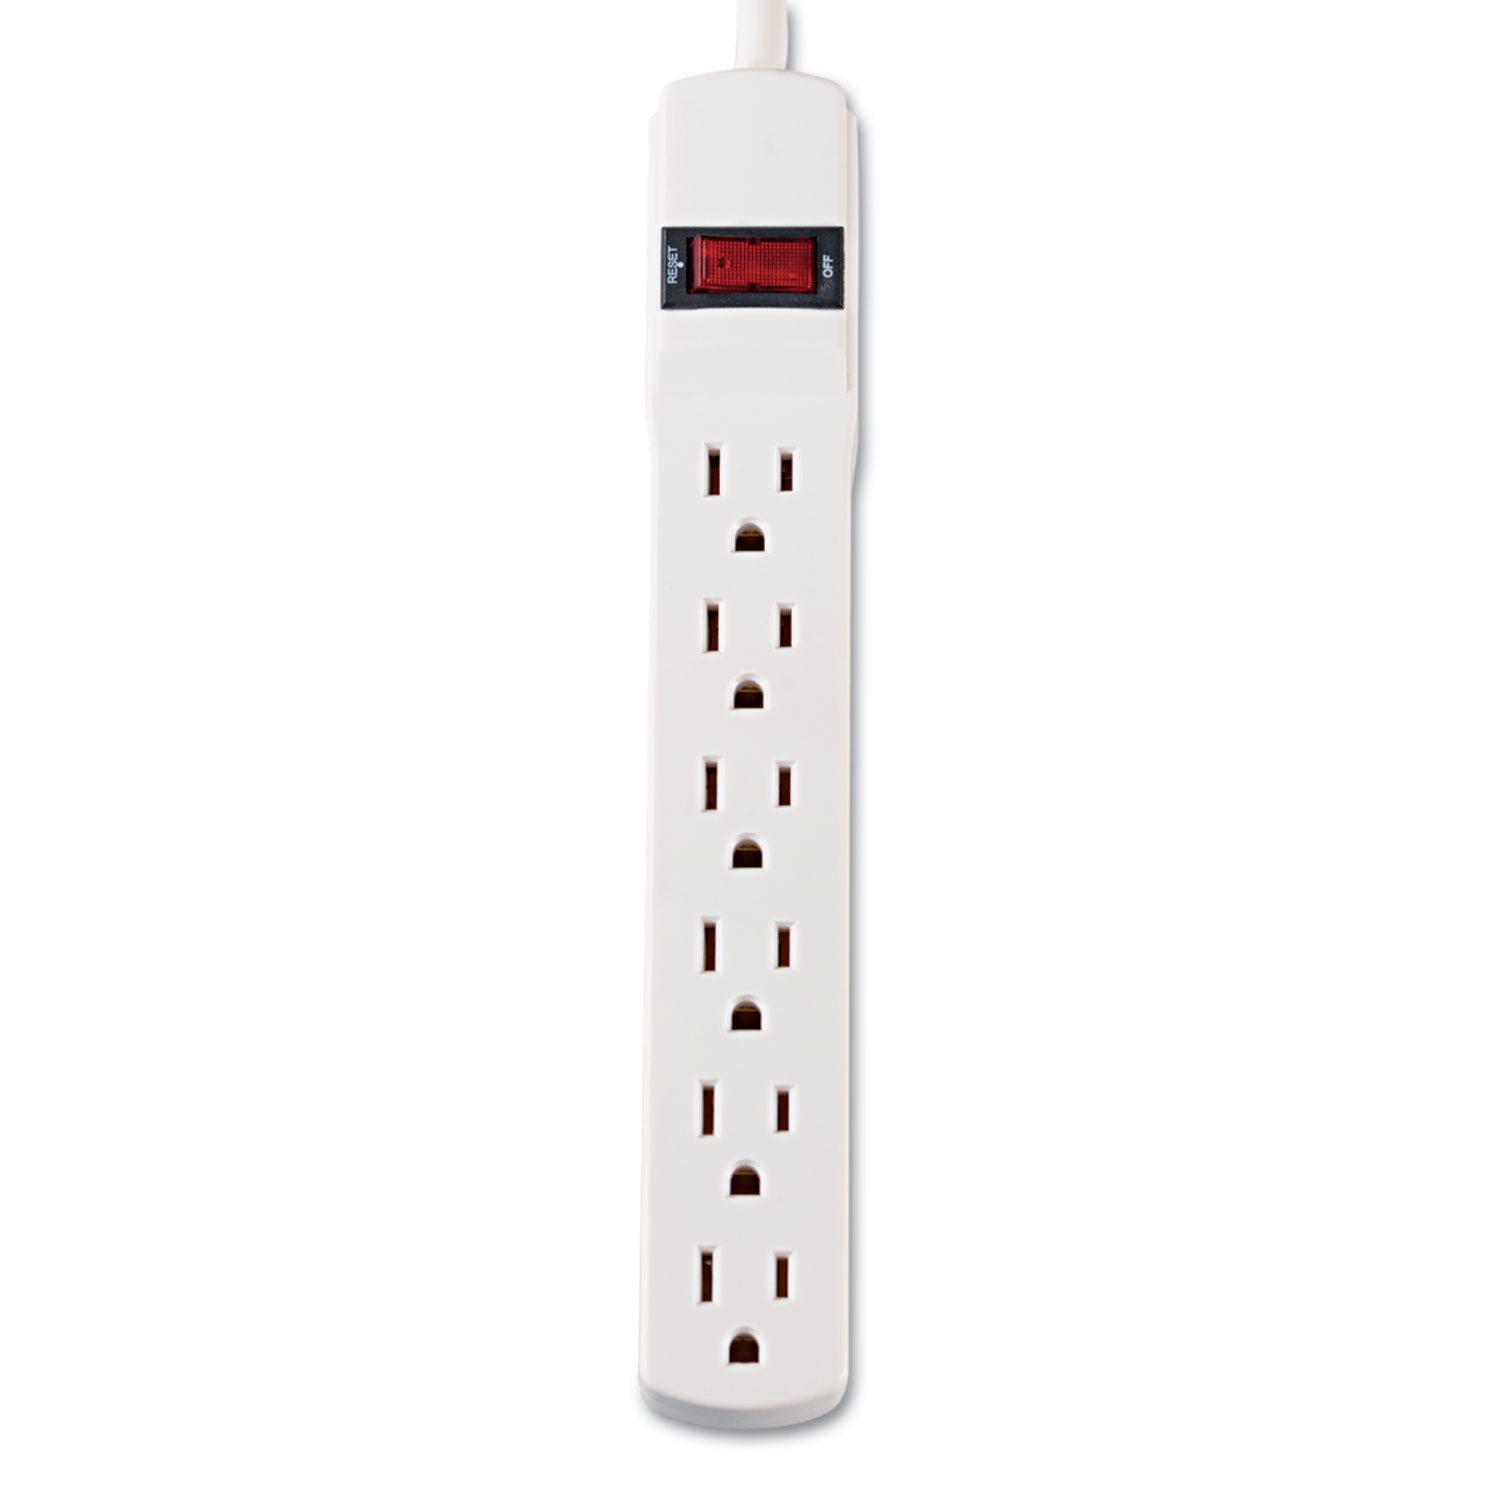 Six-Outlet Power Strip, 15-Foot Cord, 1-15/16 x 10-3/16 x 1-3/16, Ivory